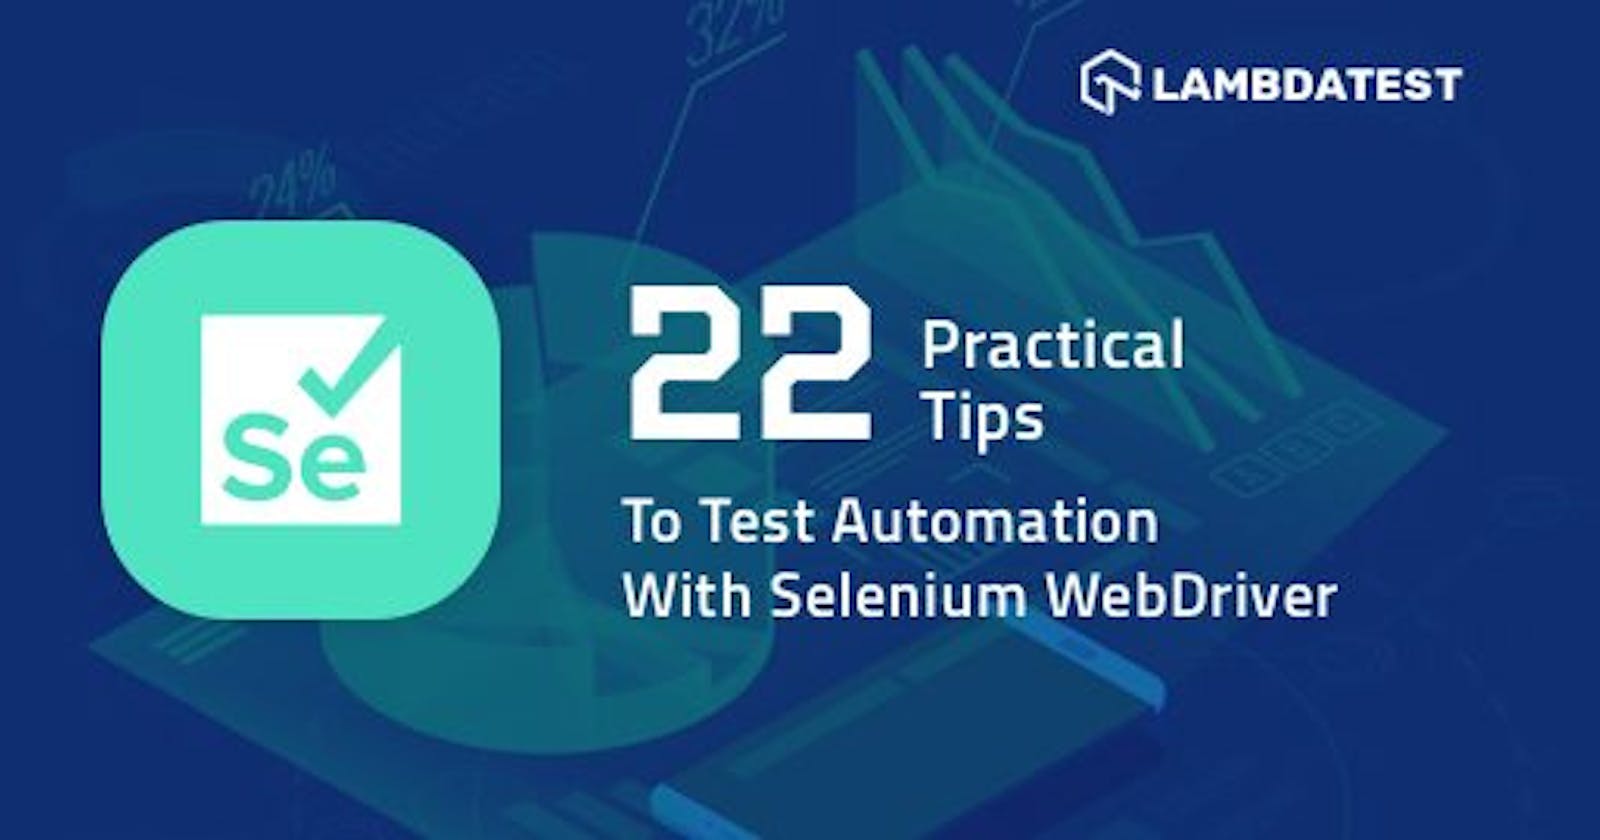 22 Practical Tips To Test Automation With Selenium WebDriver